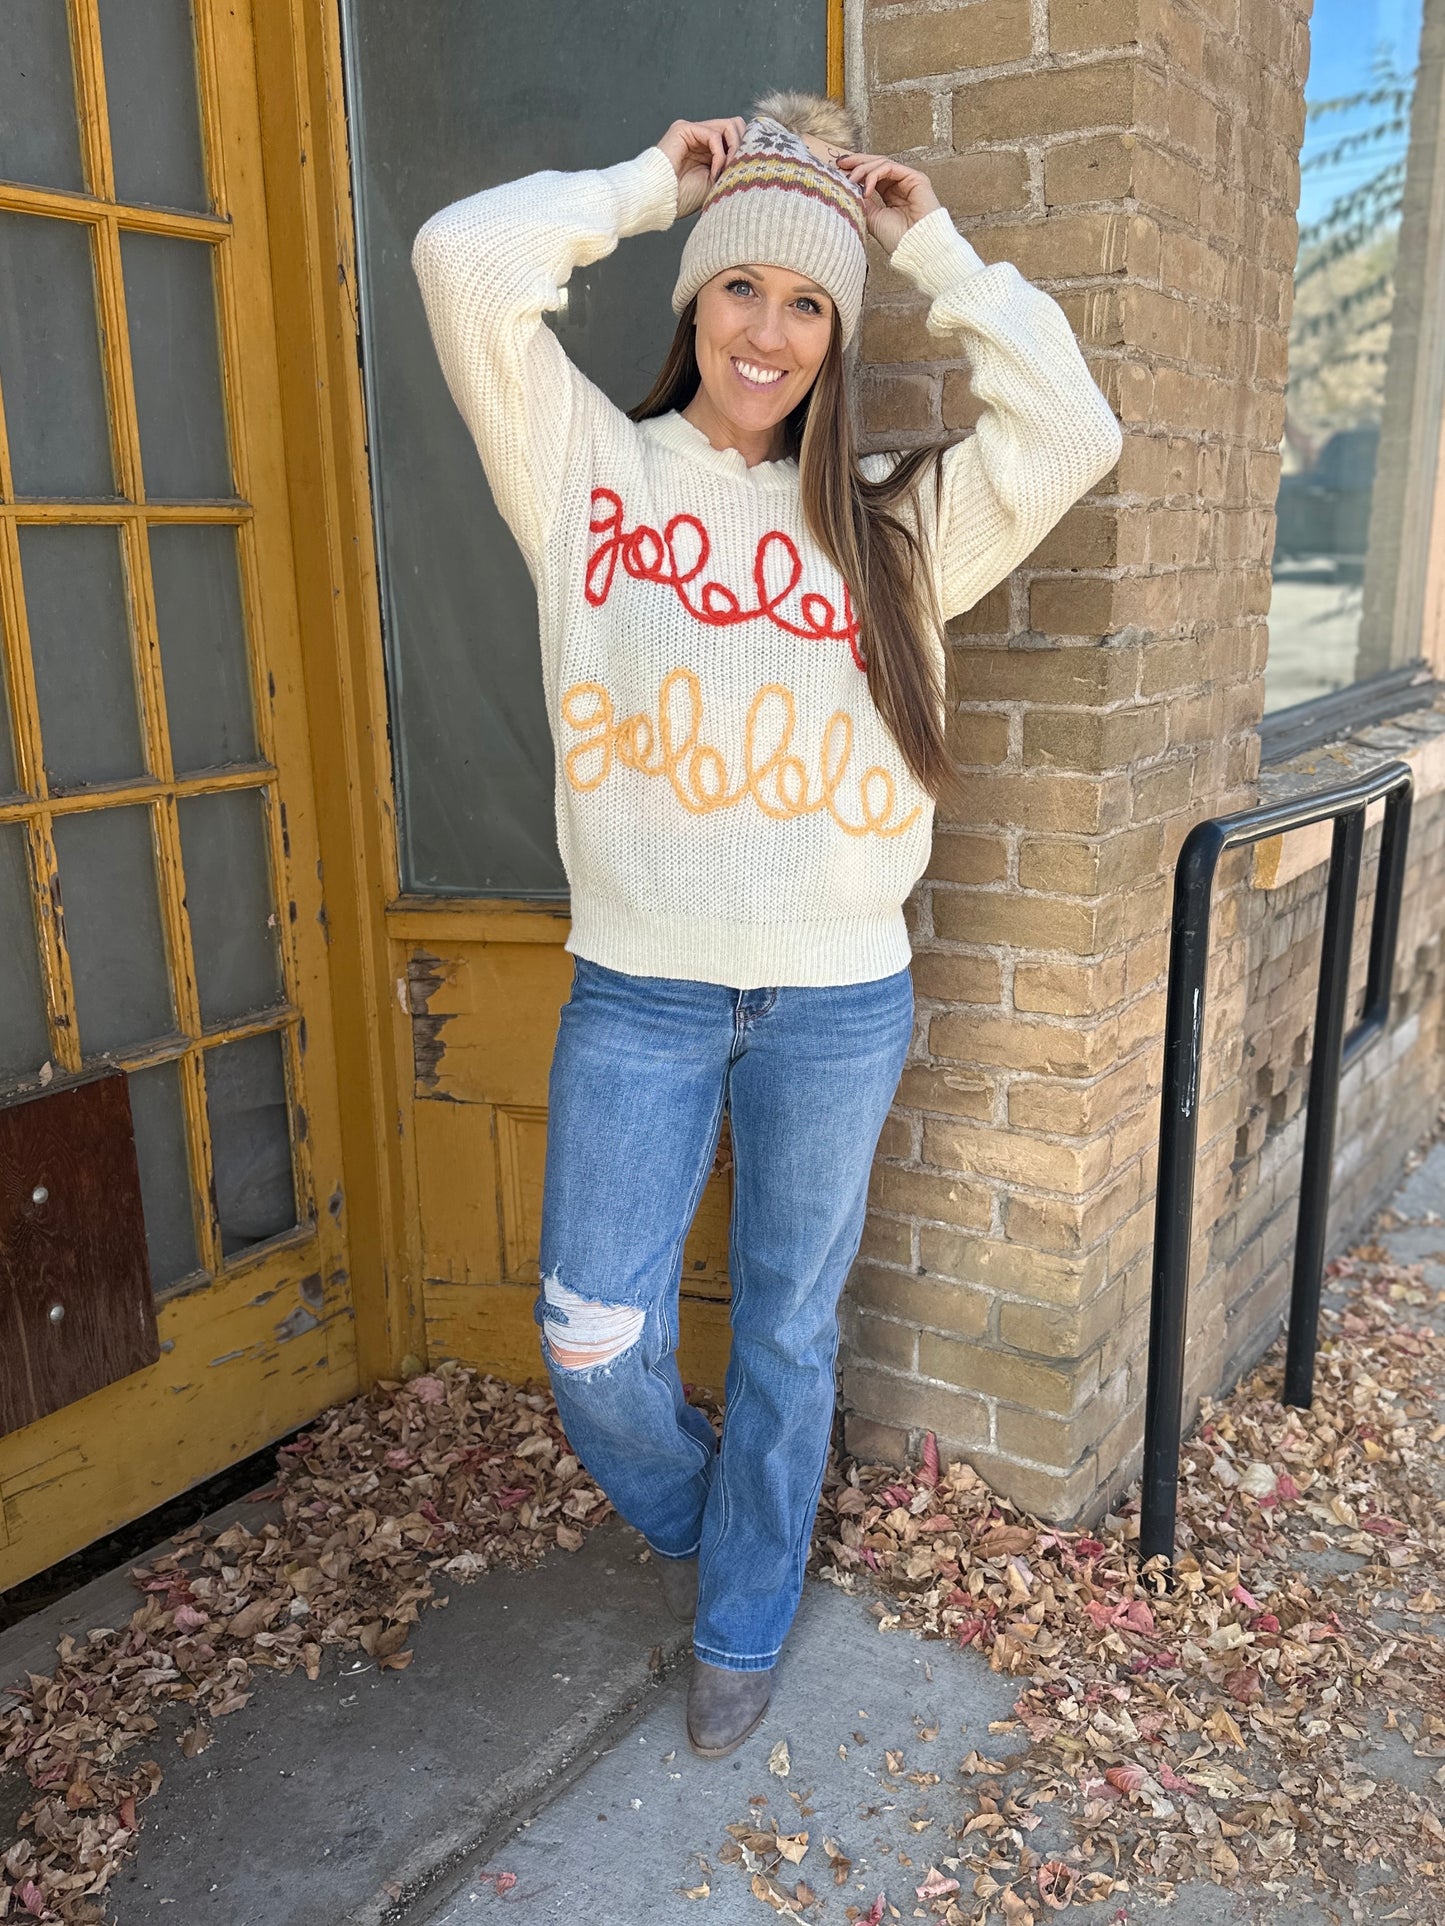 Embroidered "Gobble Gobble" Knit Sweater